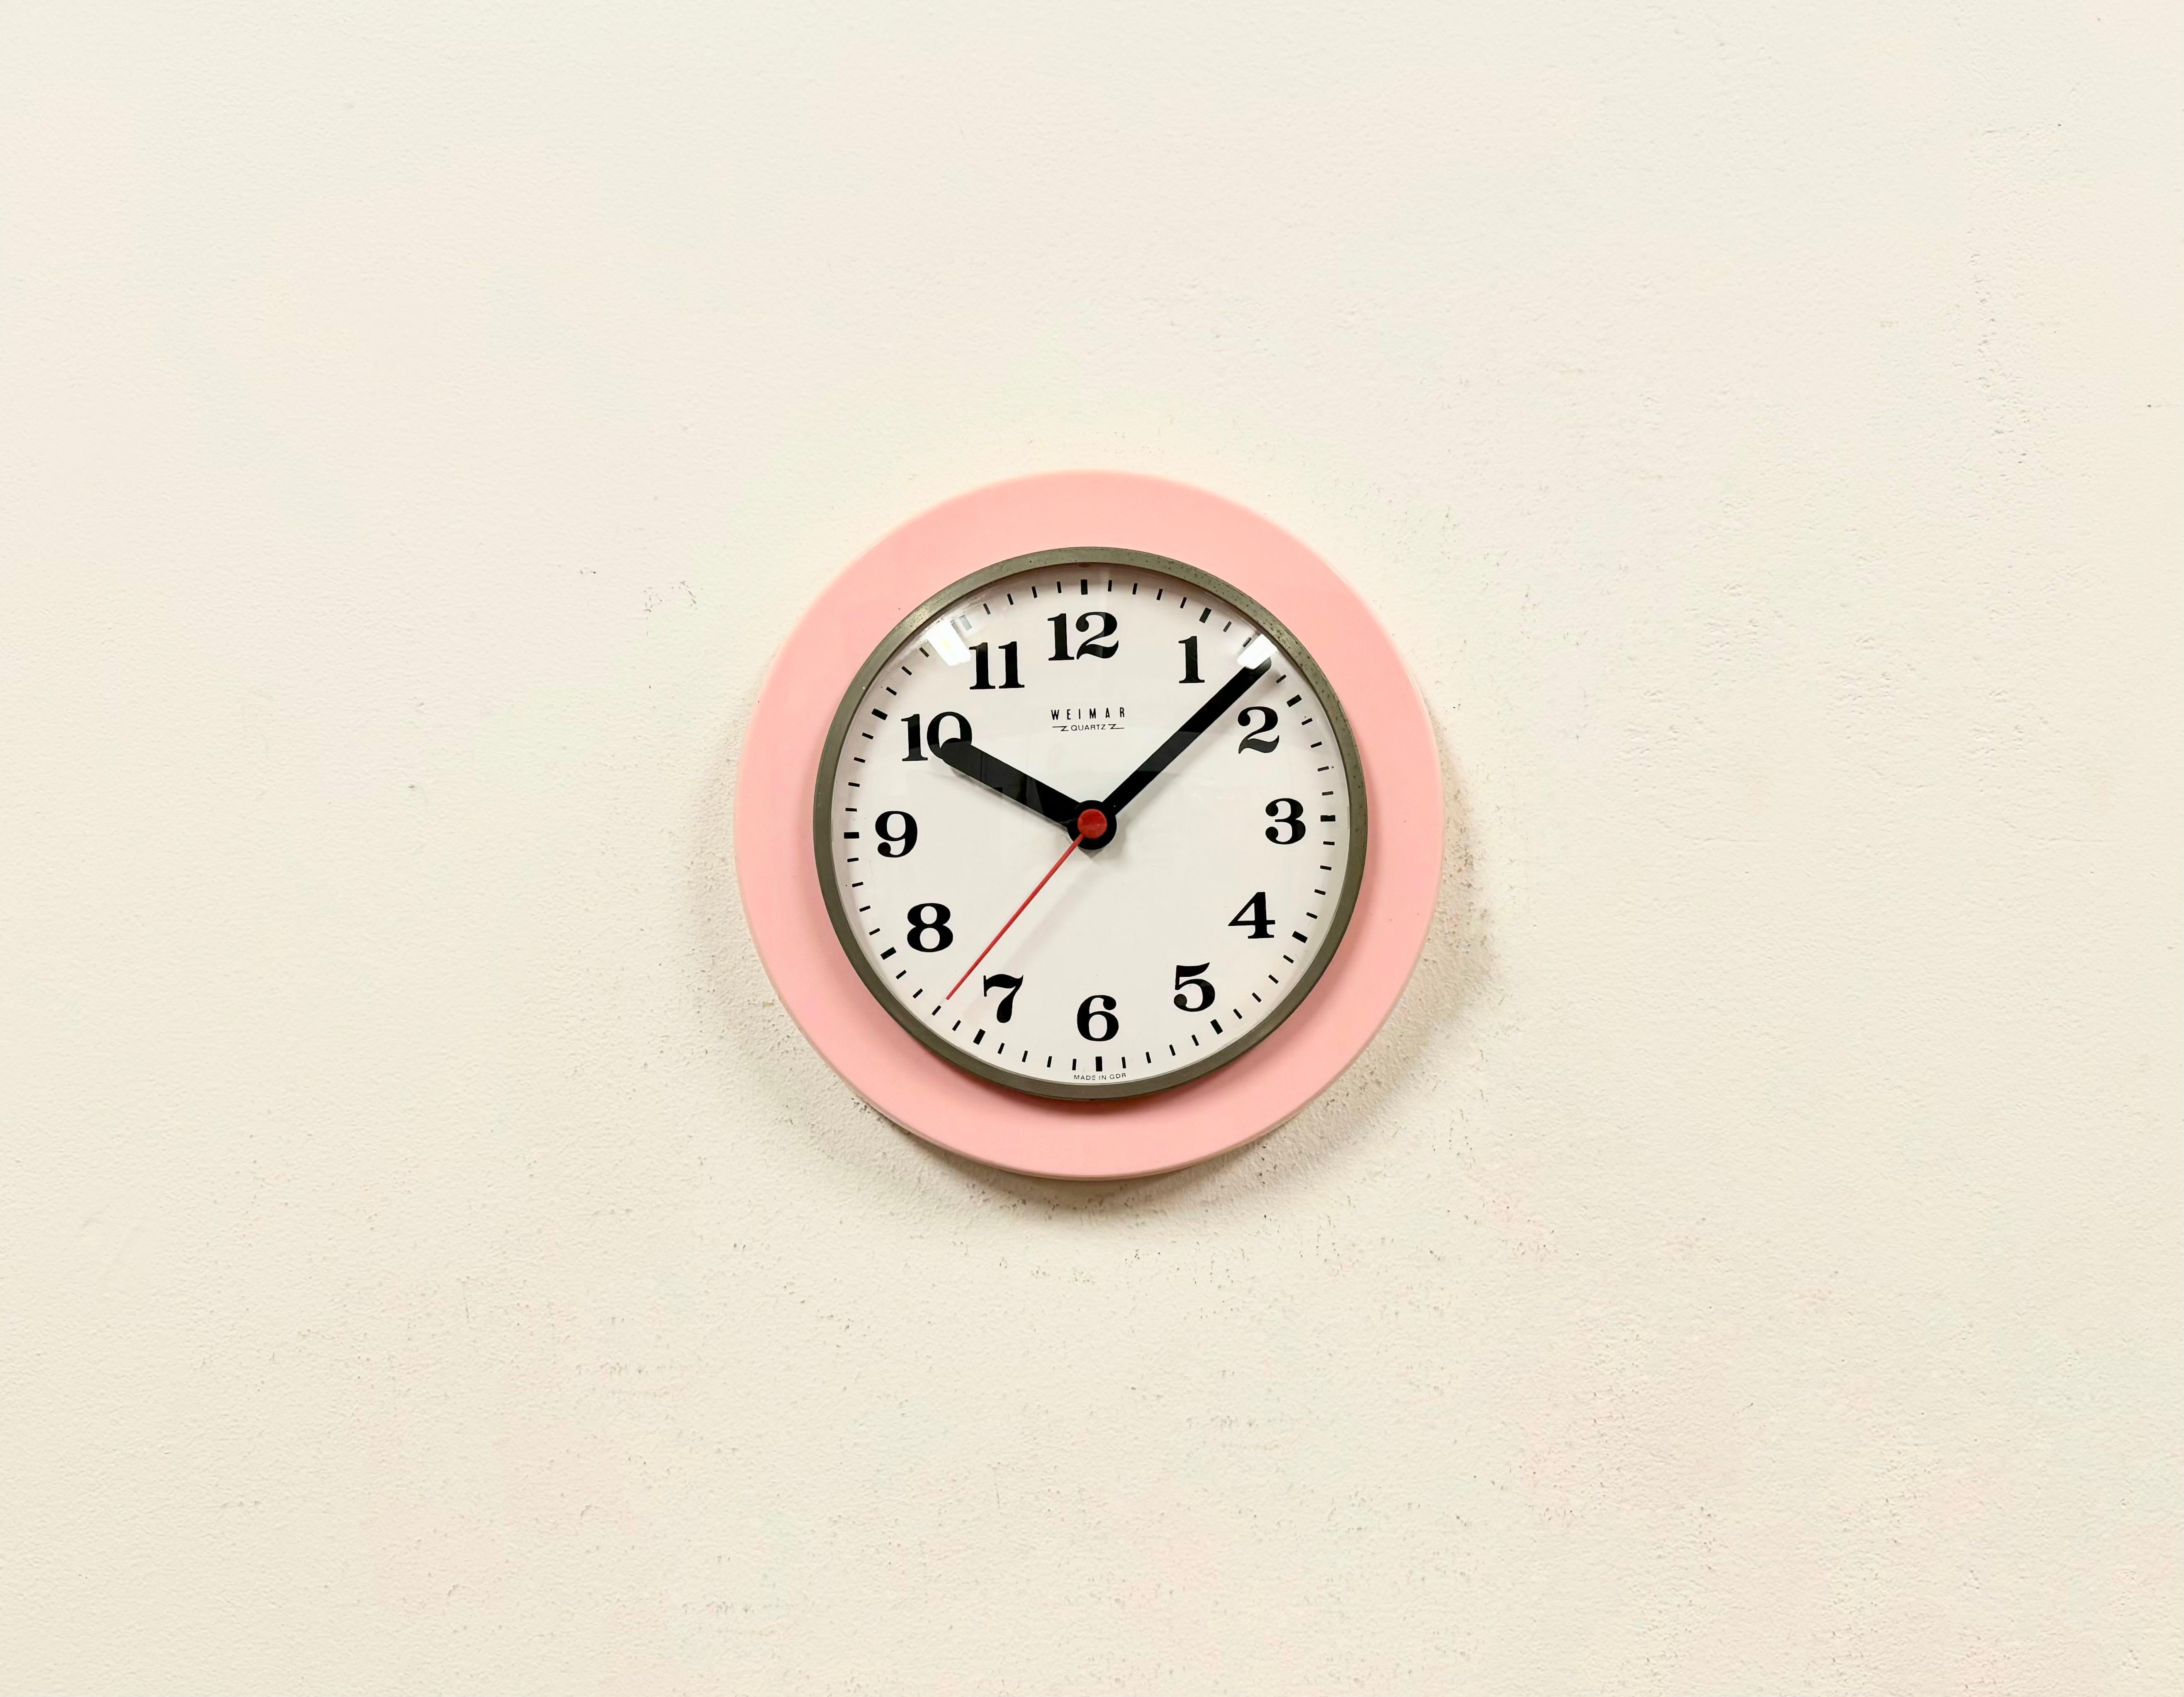 Vintage industrial wall clock produced by Weimar Quartz in former East Germany during the 1980s. It features a pink bakelite body, an aluminium hands and a curved clear glass cover with metal ring. Battery-powered clockwork requires 1 AA battery.